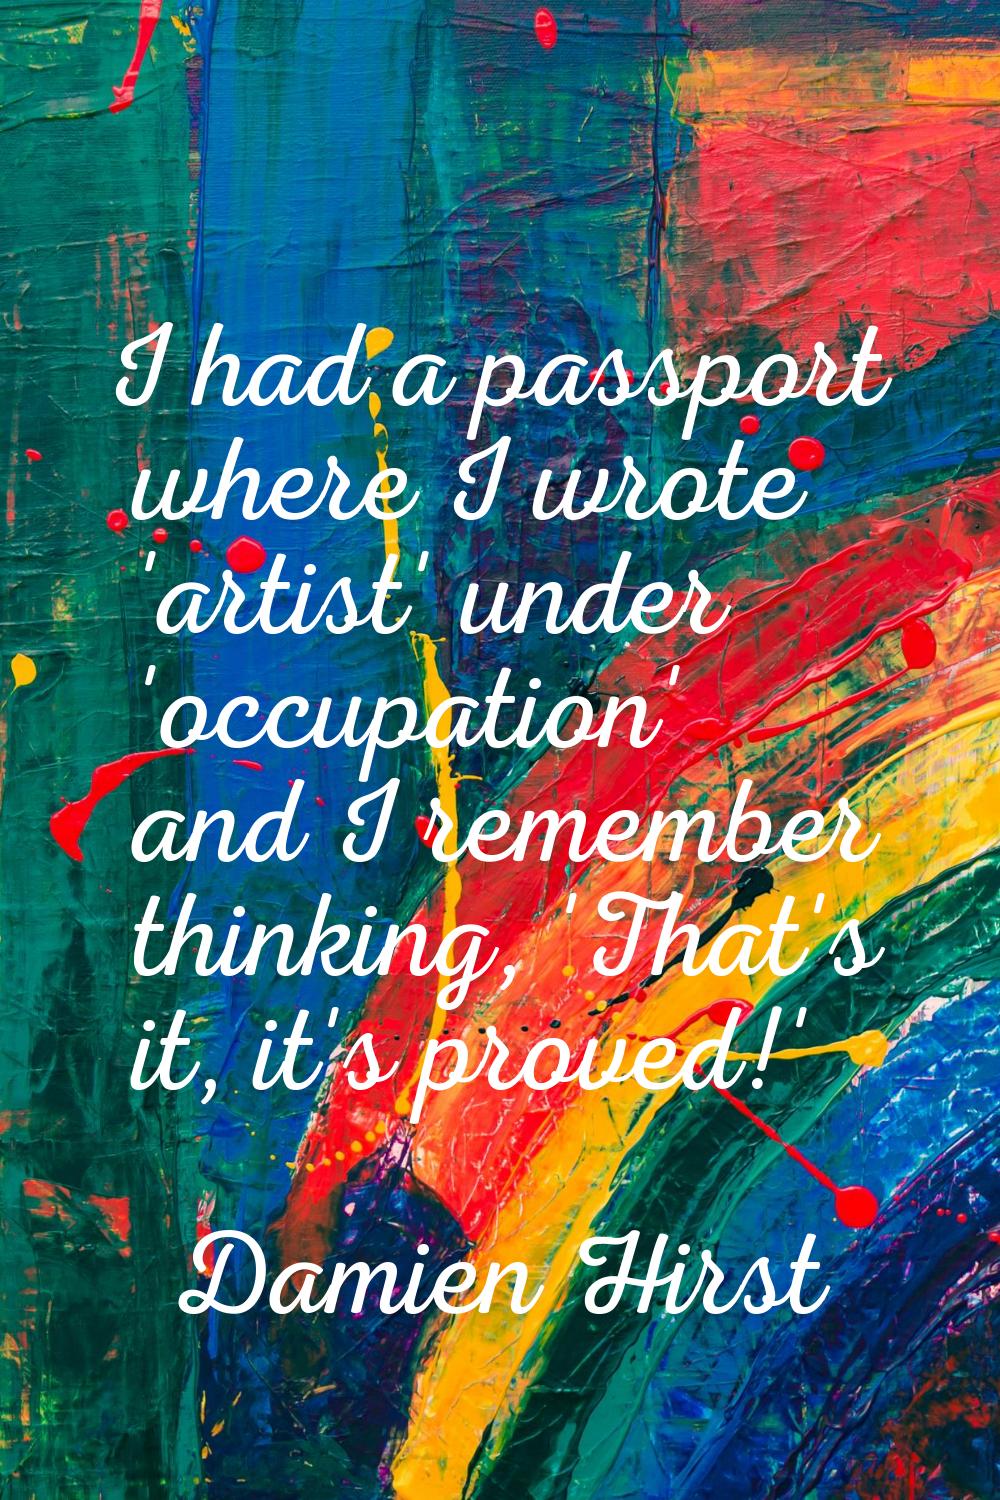 I had a passport where I wrote 'artist' under 'occupation' and I remember thinking, 'That's it, it'